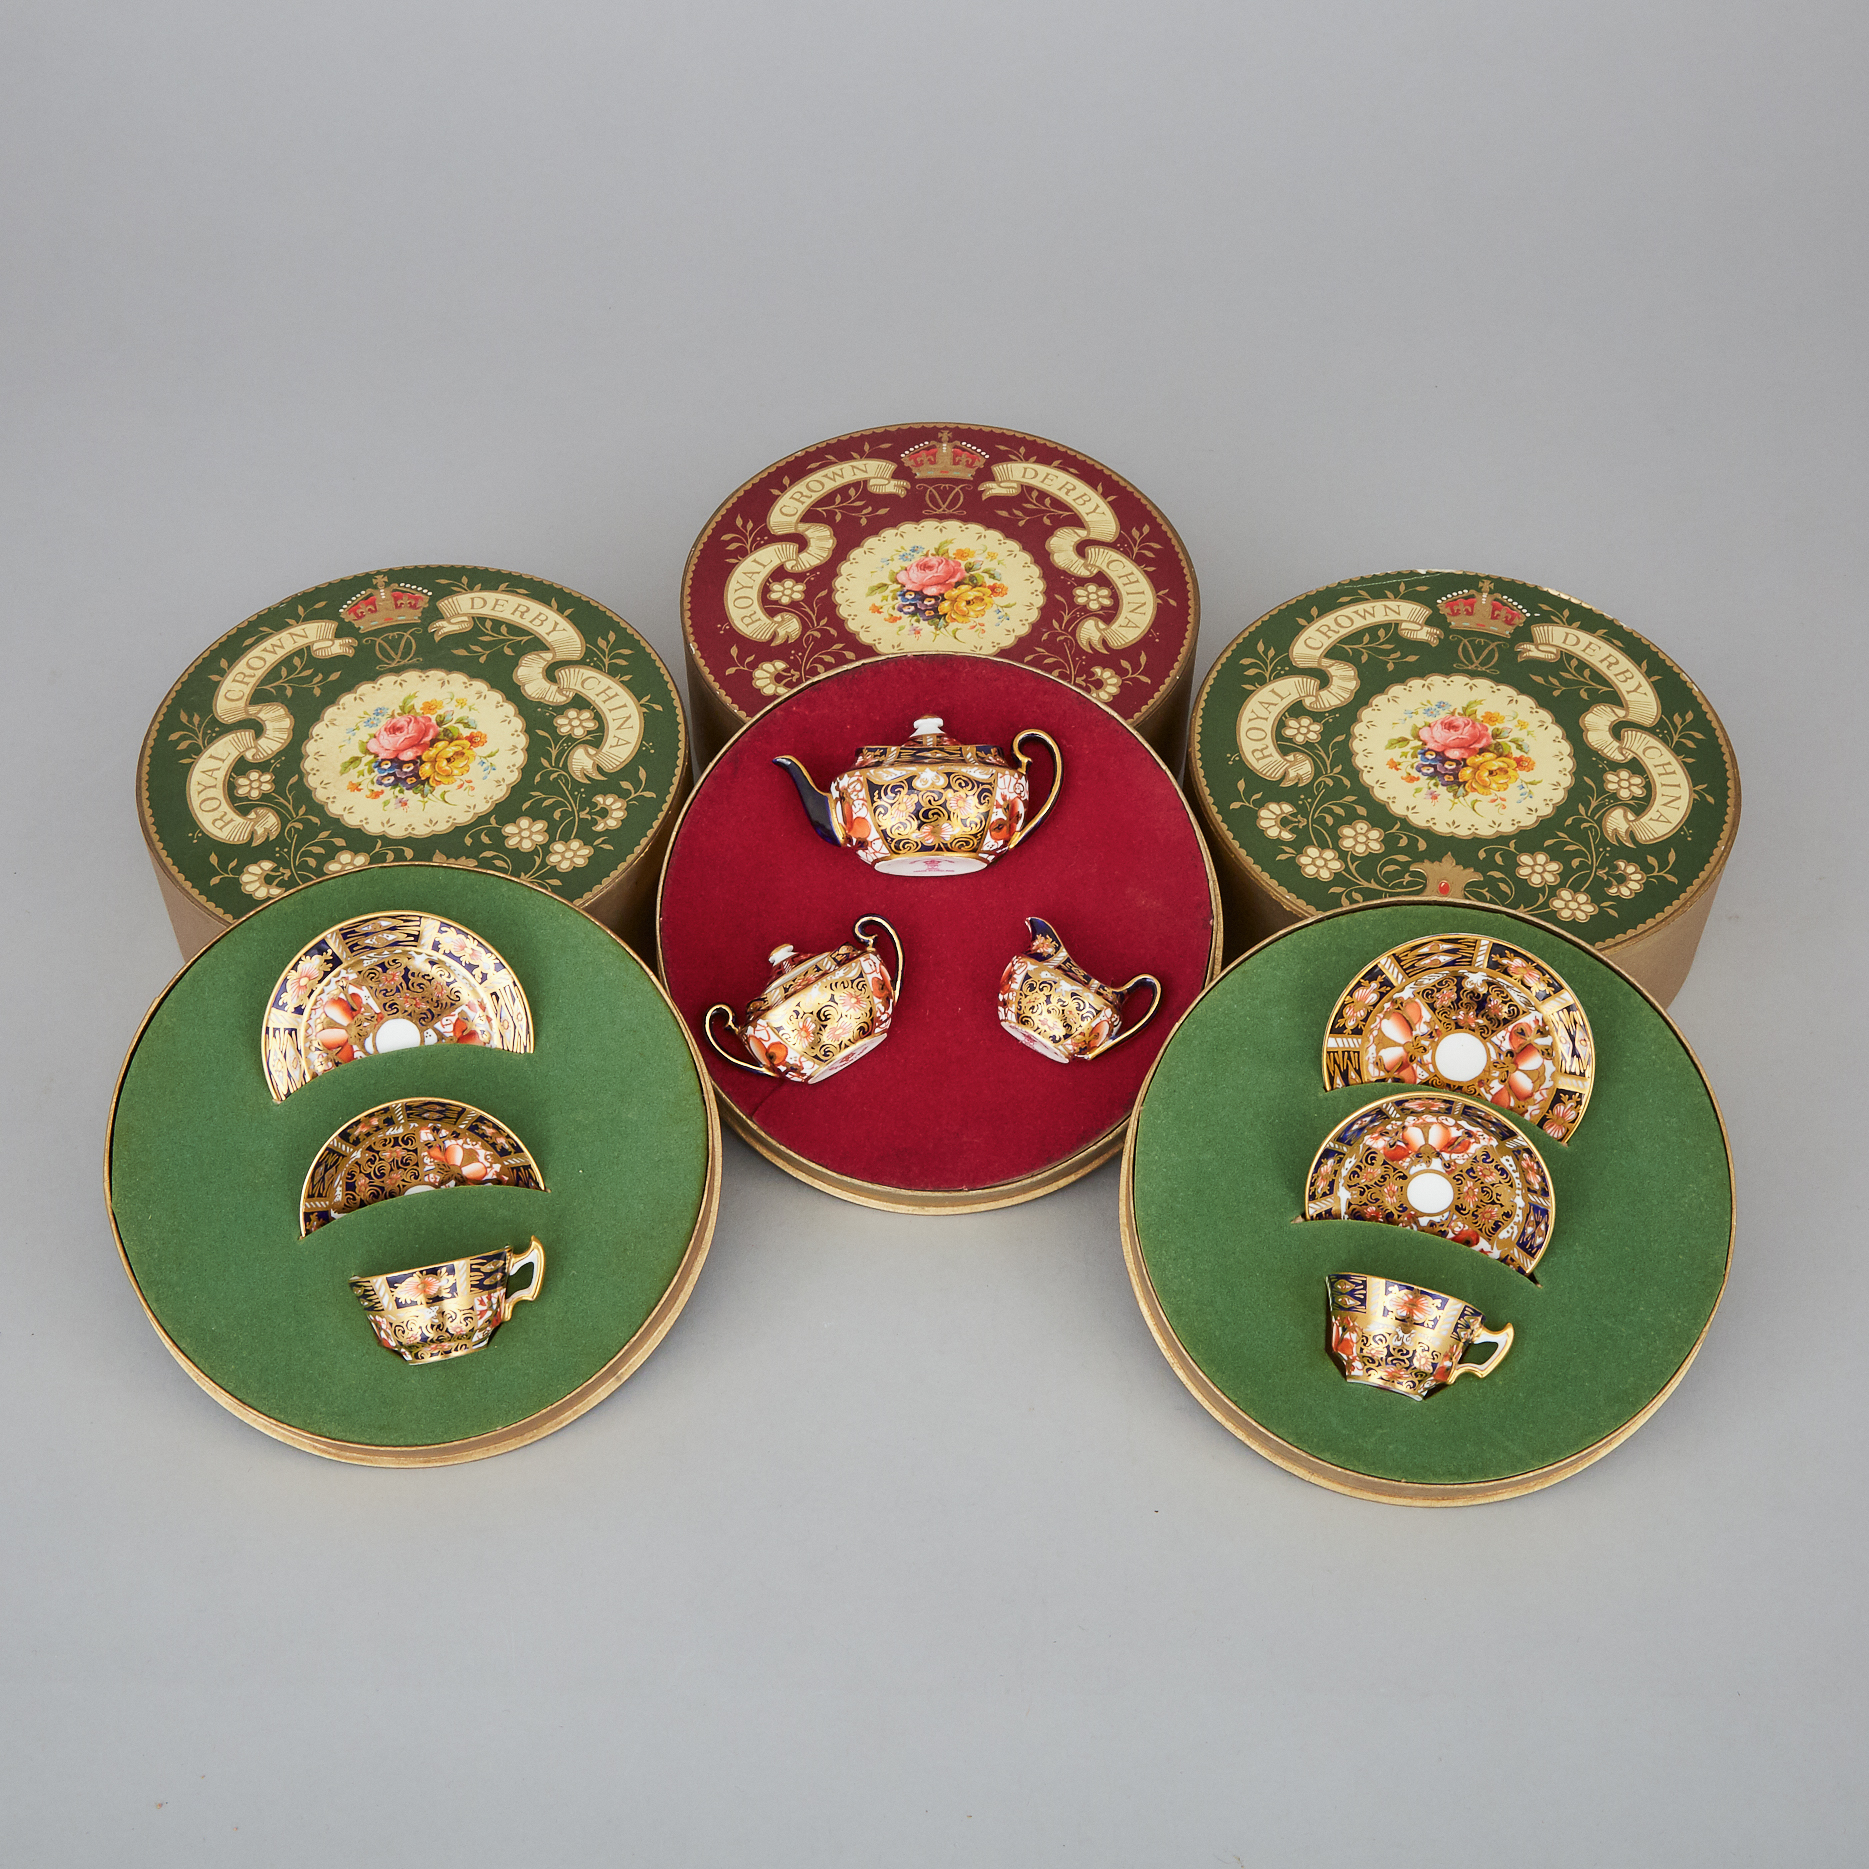 Royal Crown Derby 'Imari' (2451) Pattern Miniature Three-Piece Tea Service, Two Cups and Saucers and Two Plates, 20th century